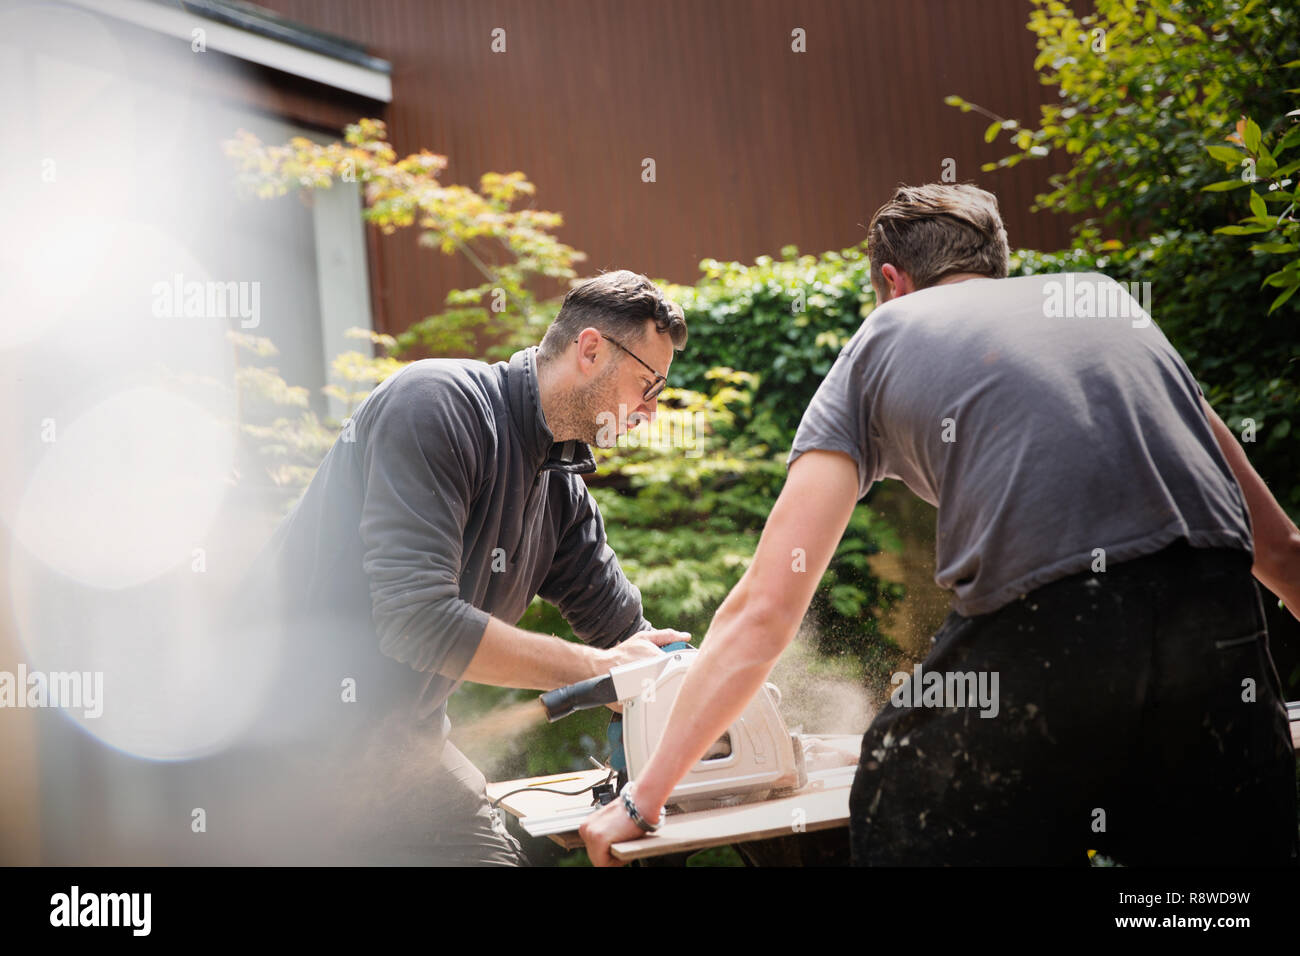 Construction workers using table saw to cut wood in driveway Stock Photo